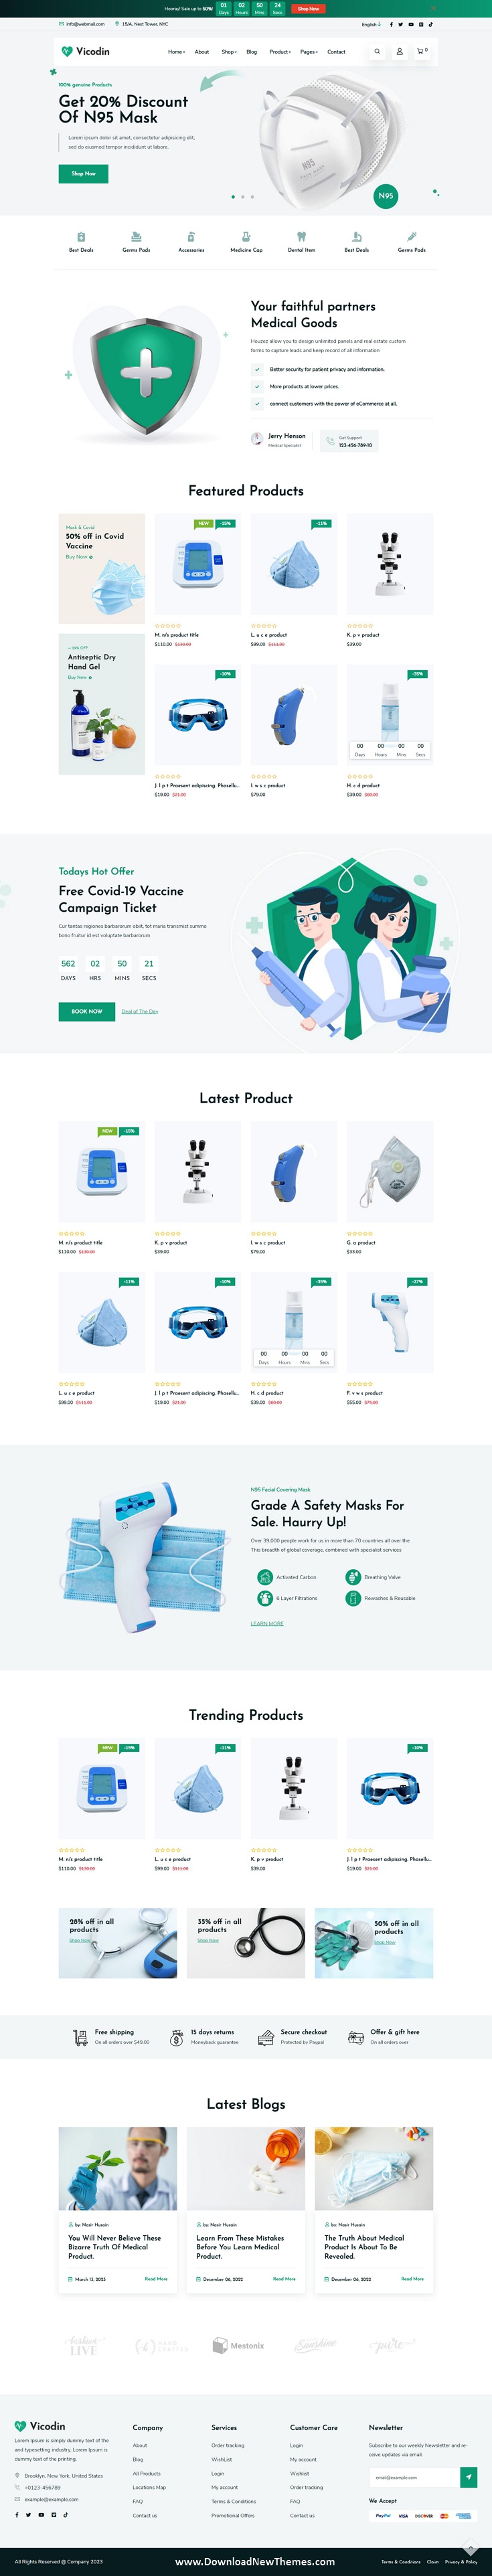 Vicodin - Health & Medical Equipment Store eCommerce Shopify Theme OS 2.0 Review